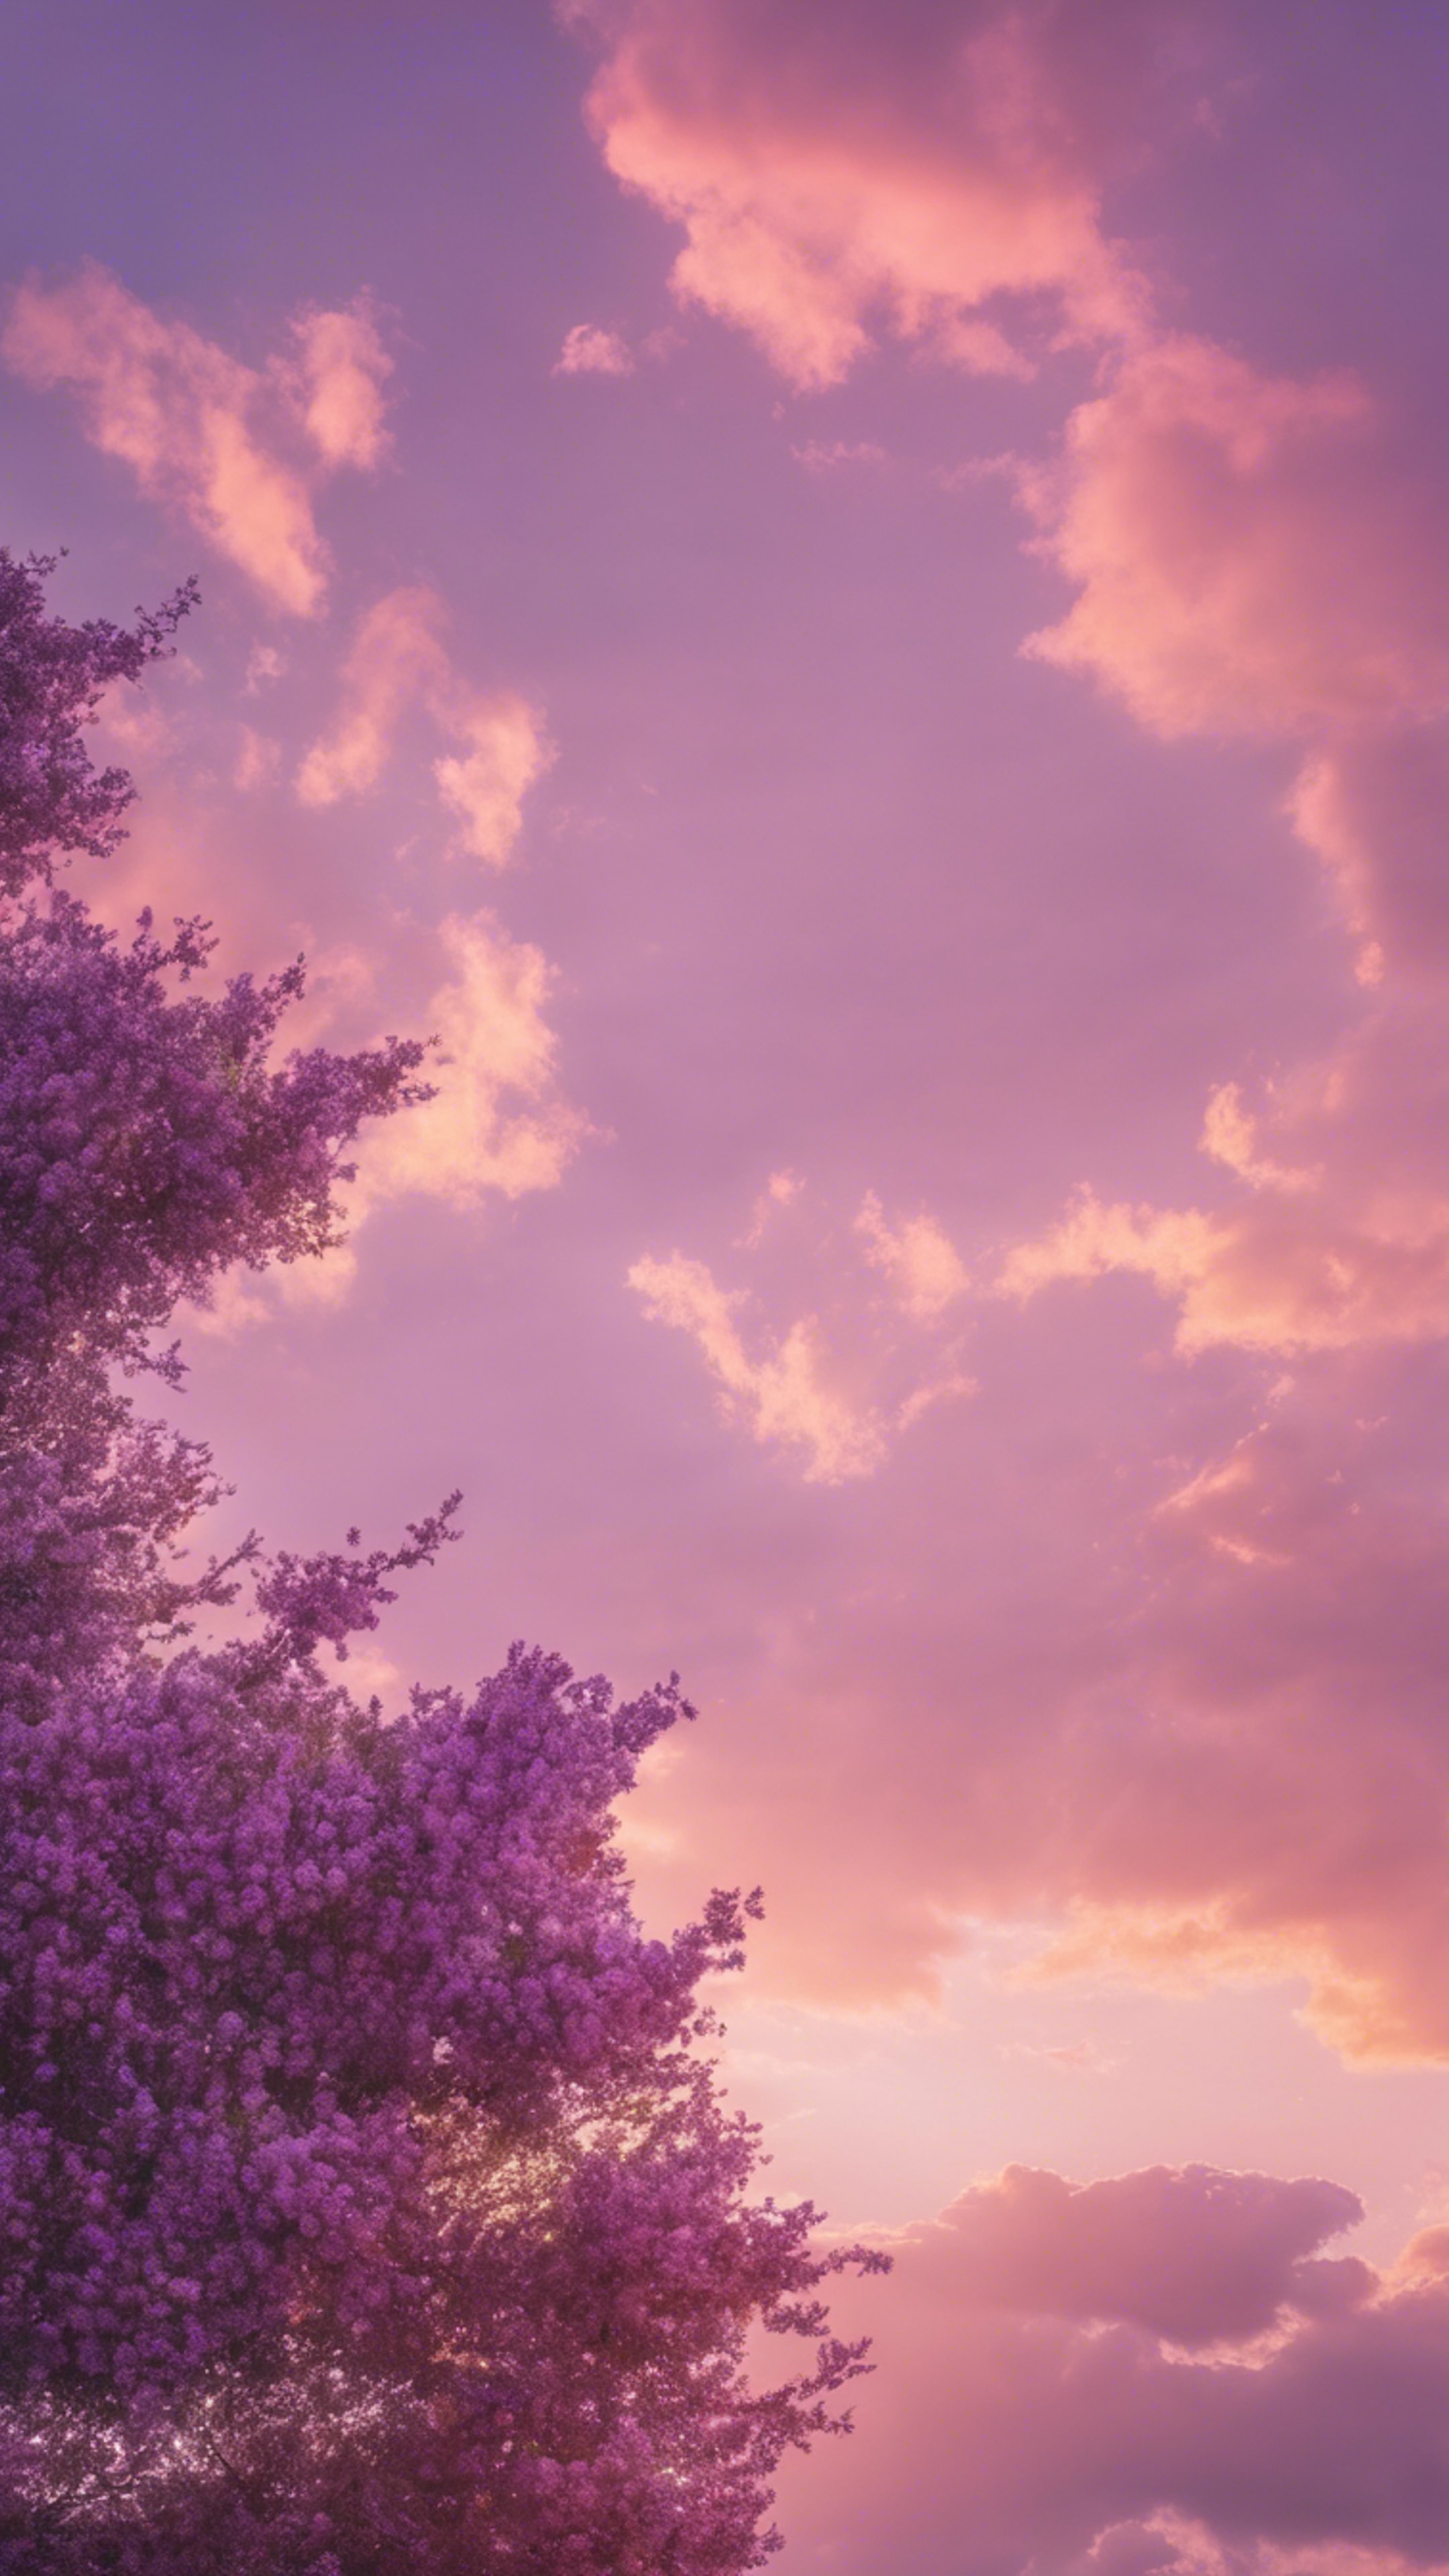 A serene sunset illuminating the sky with hues of light pink and lavender. Wallpaper[9e1e7b79399f45598a92]